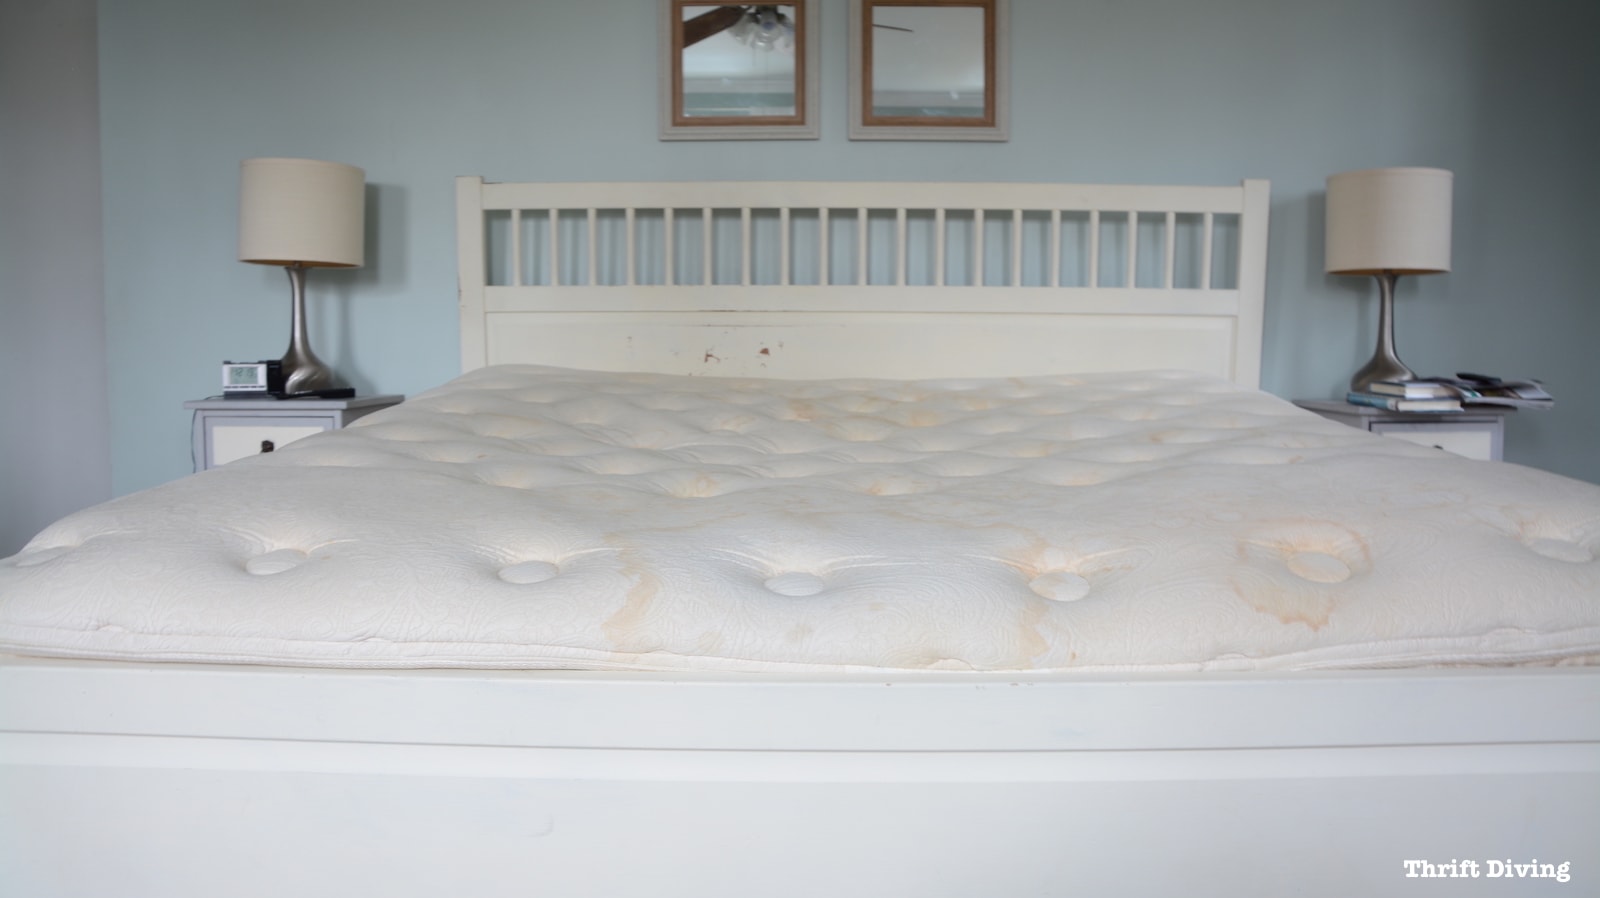 Lull Mattress Review and painted IKEA bed frame - BEFORE - Stained mattress needs to be replaced. - Thrift Diving